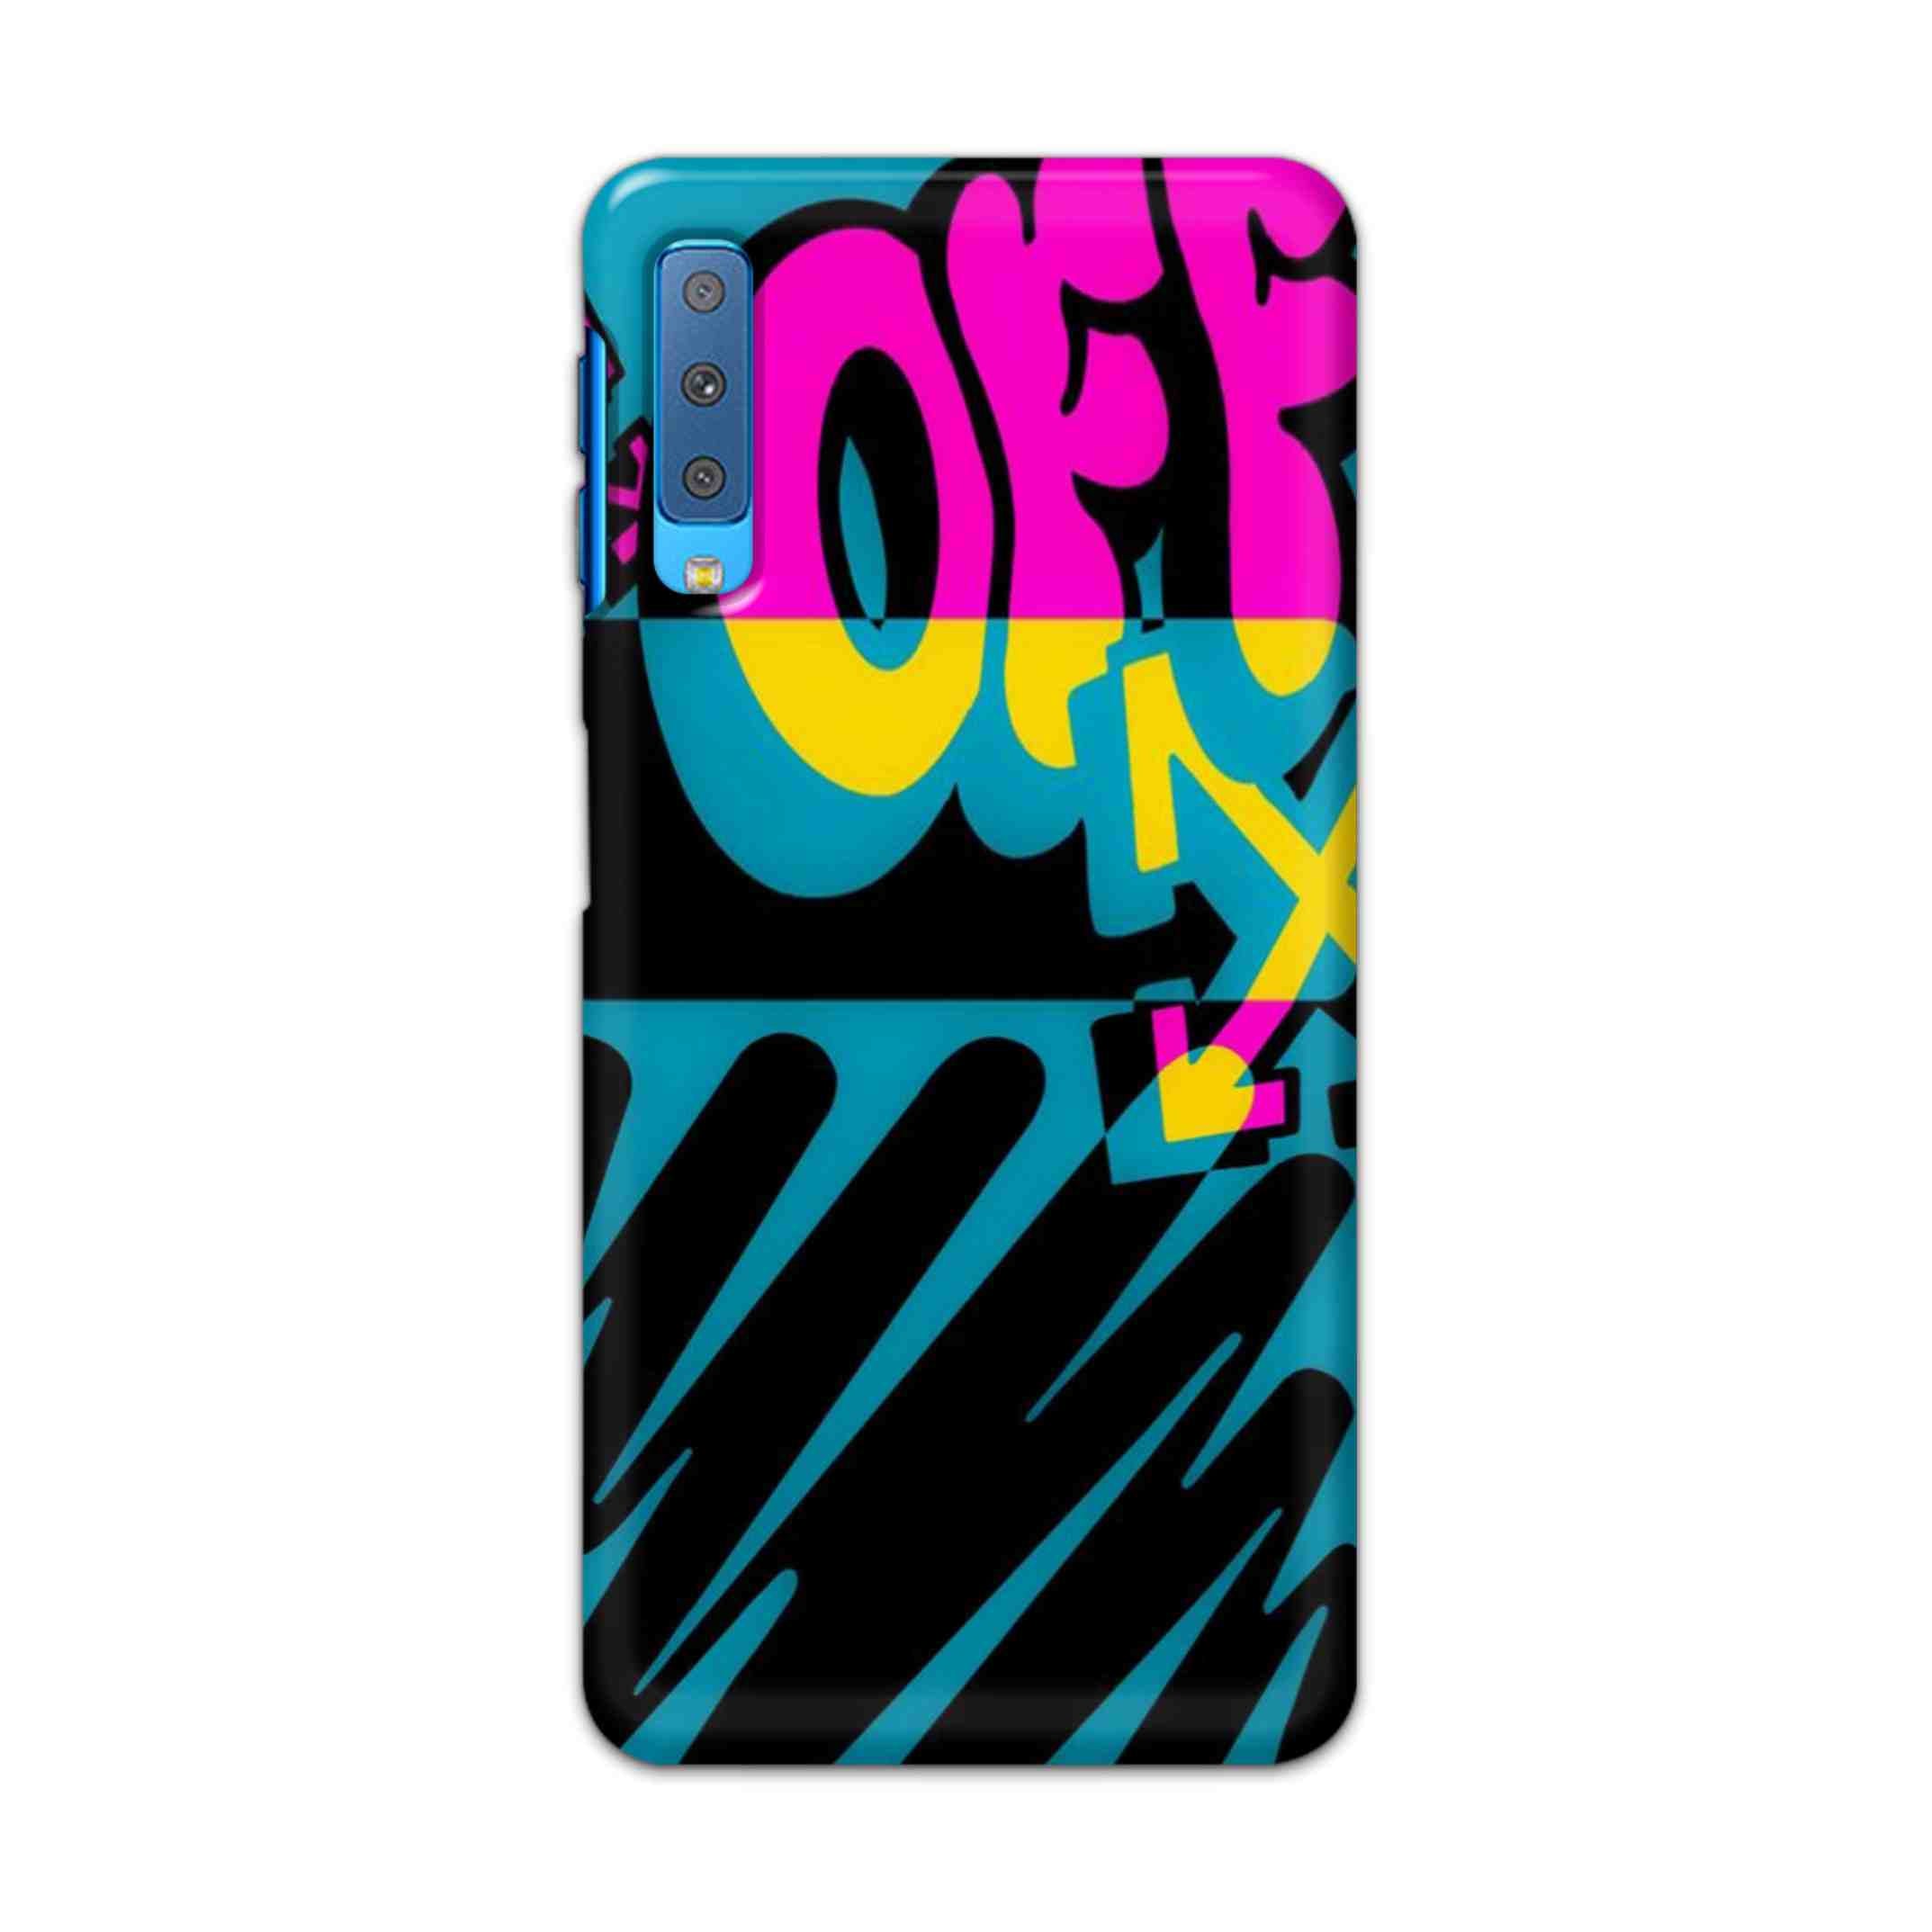 Buy Off Hard Back Mobile Phone Case Cover For Samsung Galaxy A7 2018 Online